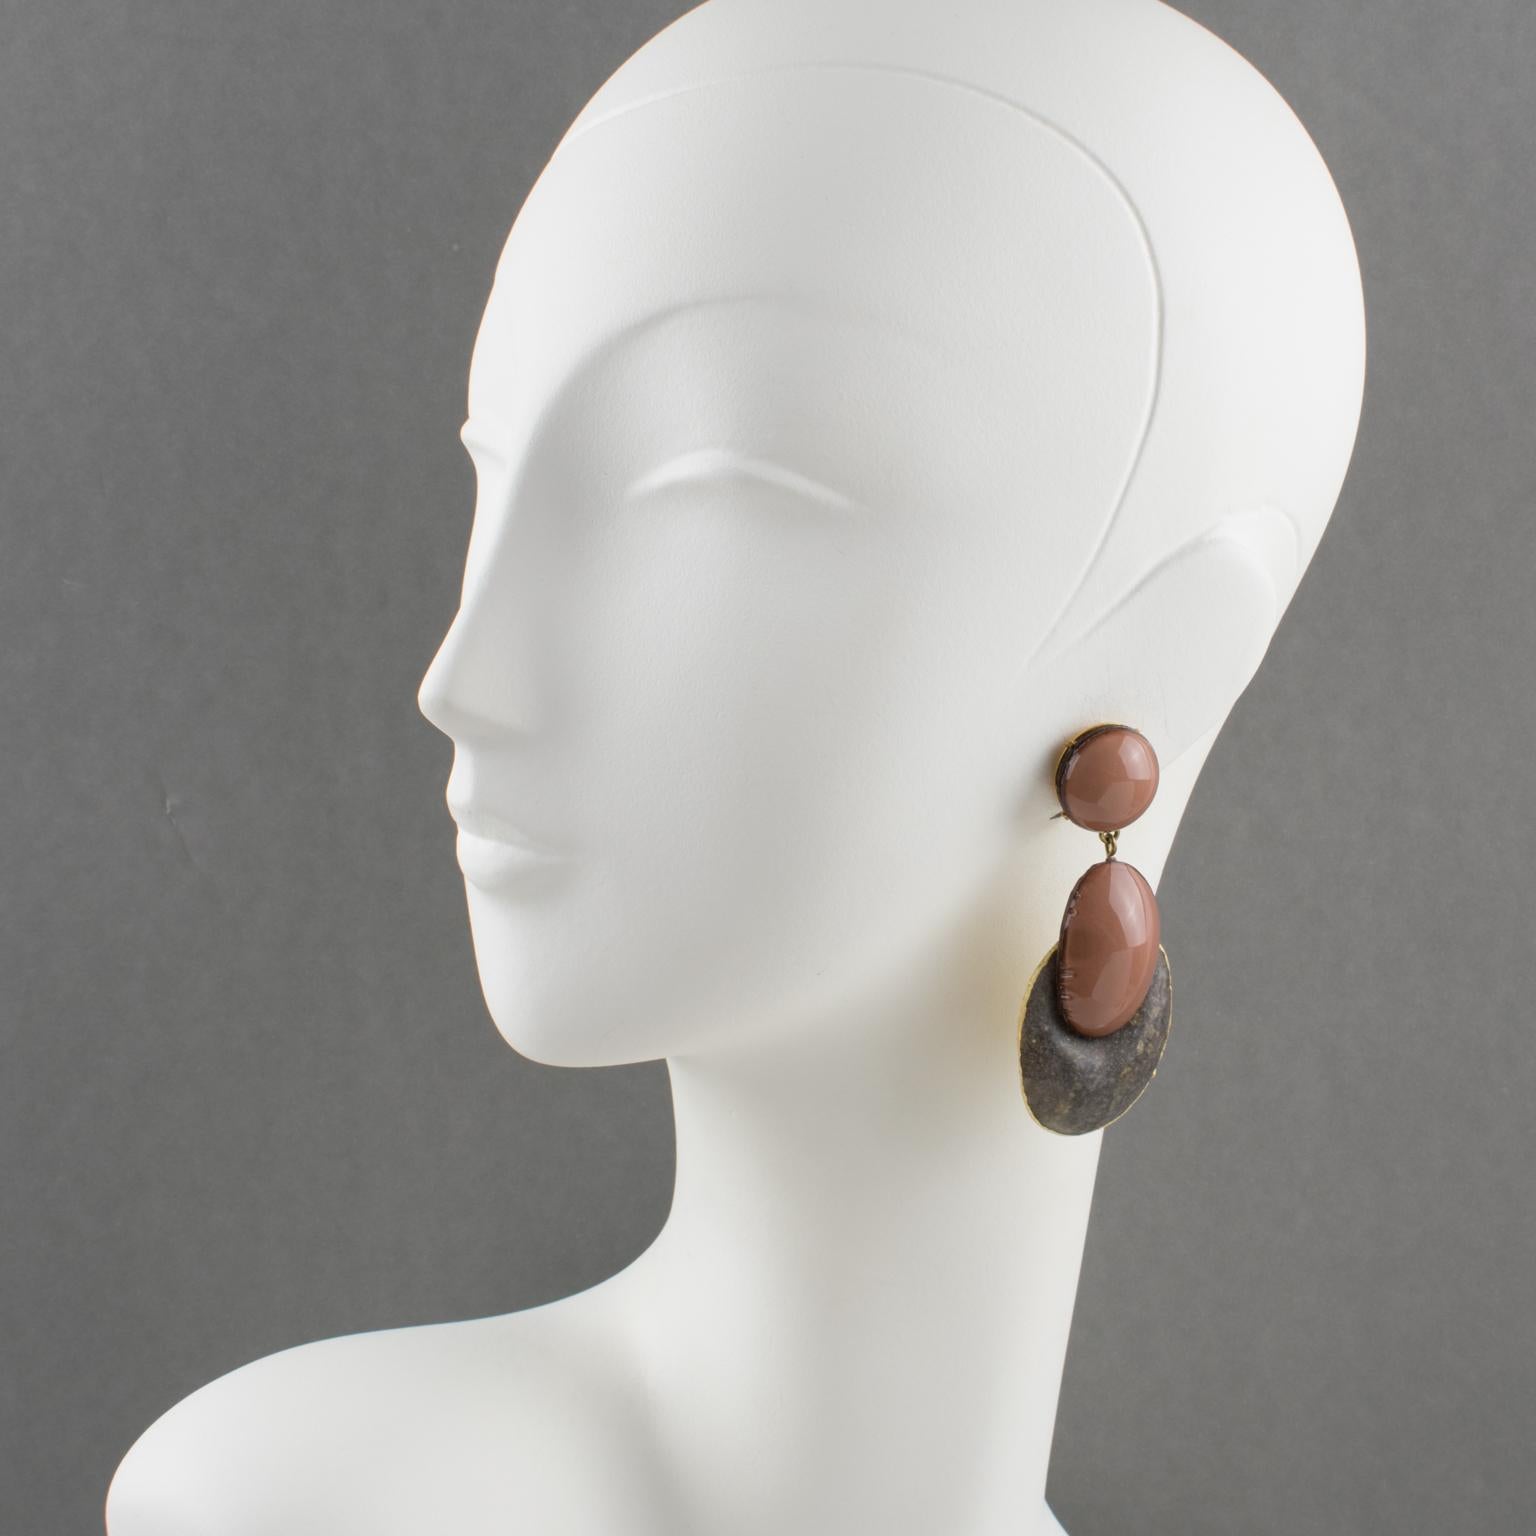 Elegant clip-on earrings designed by Cilea Paris. Dimensional dangling-inspired hand-made artisanal resin earrings with a textured pattern and glossy finish. A lovely fall season palette built with nude-beige, taupe-beige, and bittersweet chocolate